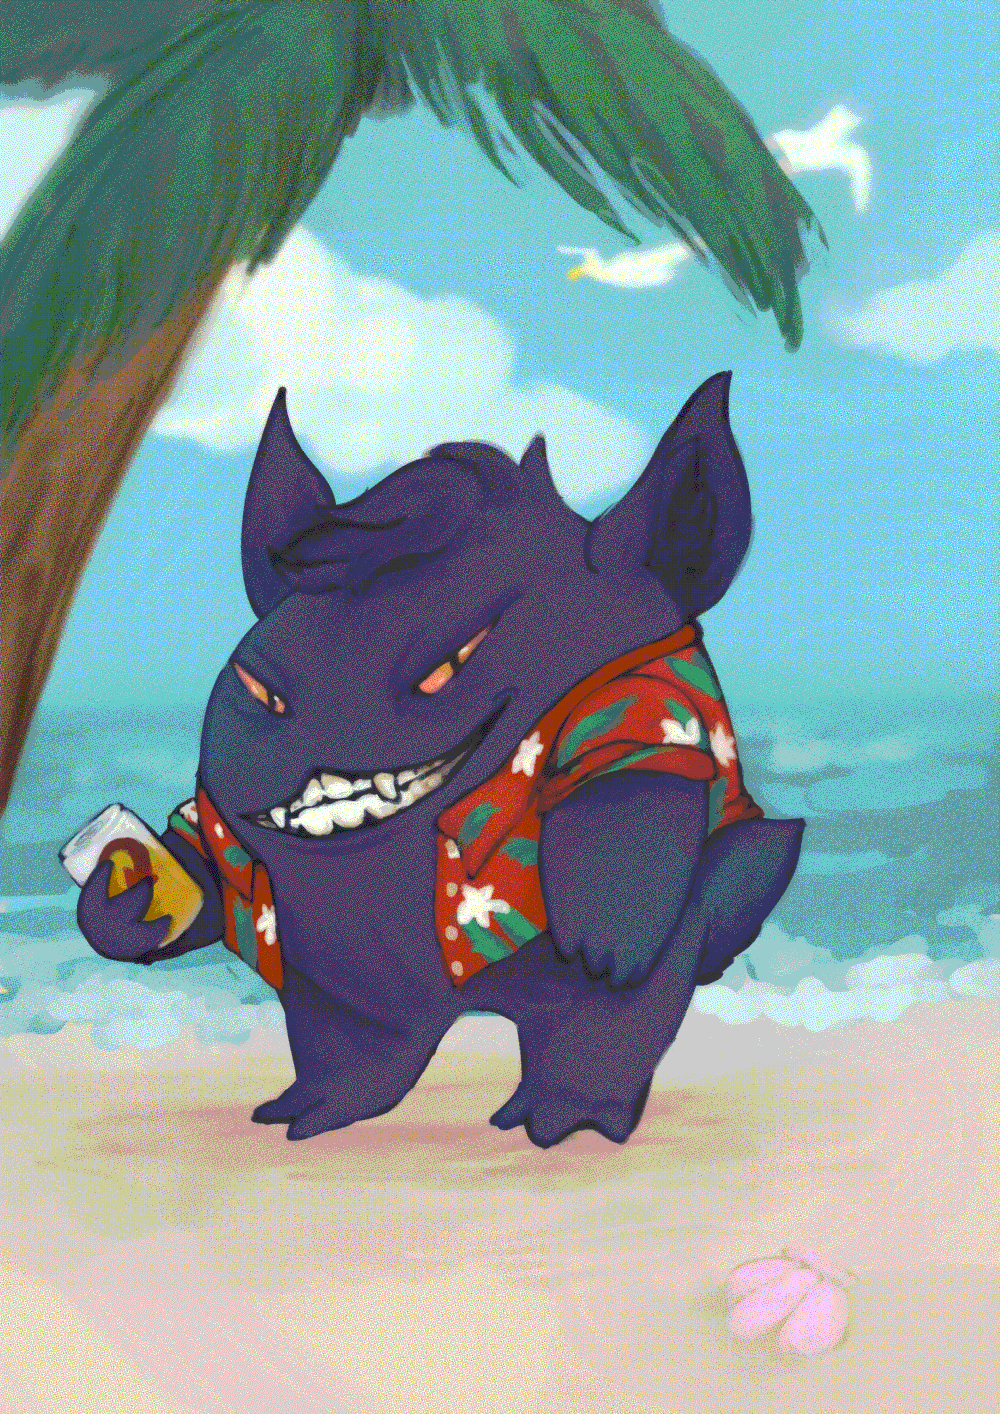 drawing of a grinning gengar wearing a red floral shirt and holding a beer can, standing under a palm tree on a sunny beach.